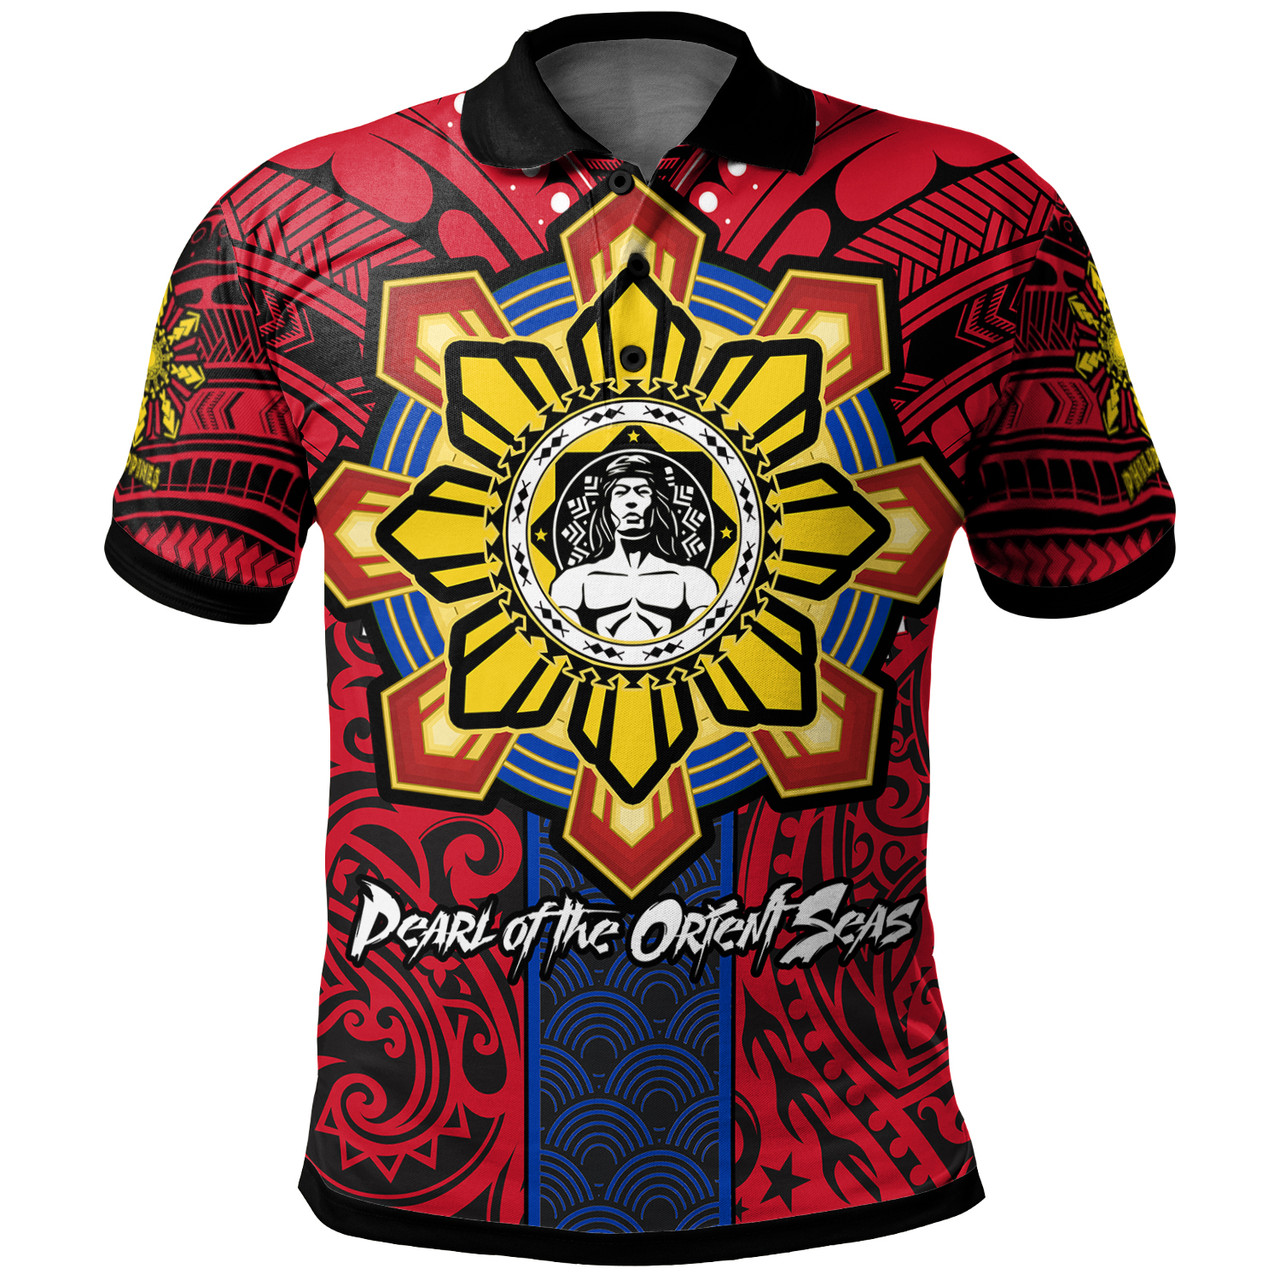 Philippines Polo Shirt The Story of Lapu-Lapu Pearl of the Orient Seas Tribal Pride